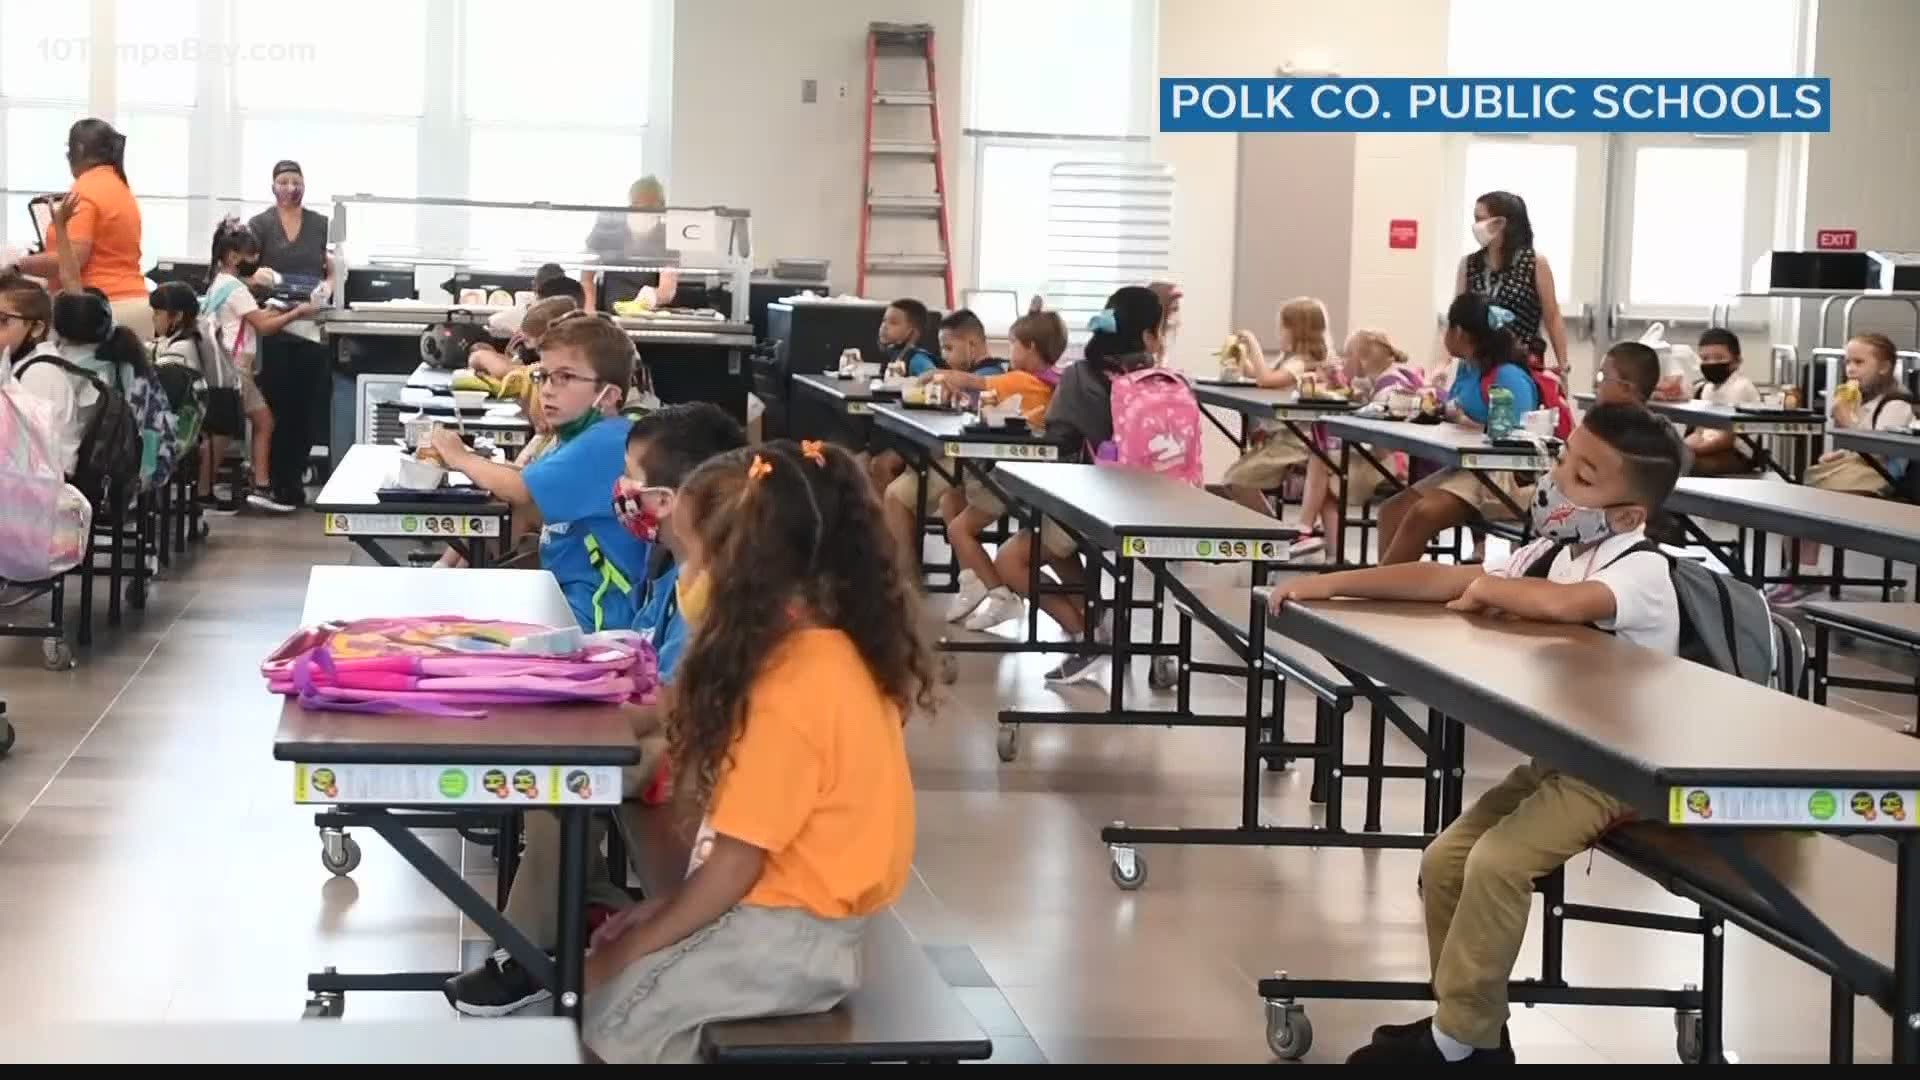 The largest teachers' union in the state says pediatric cases have skyrocketed since schools reopened.